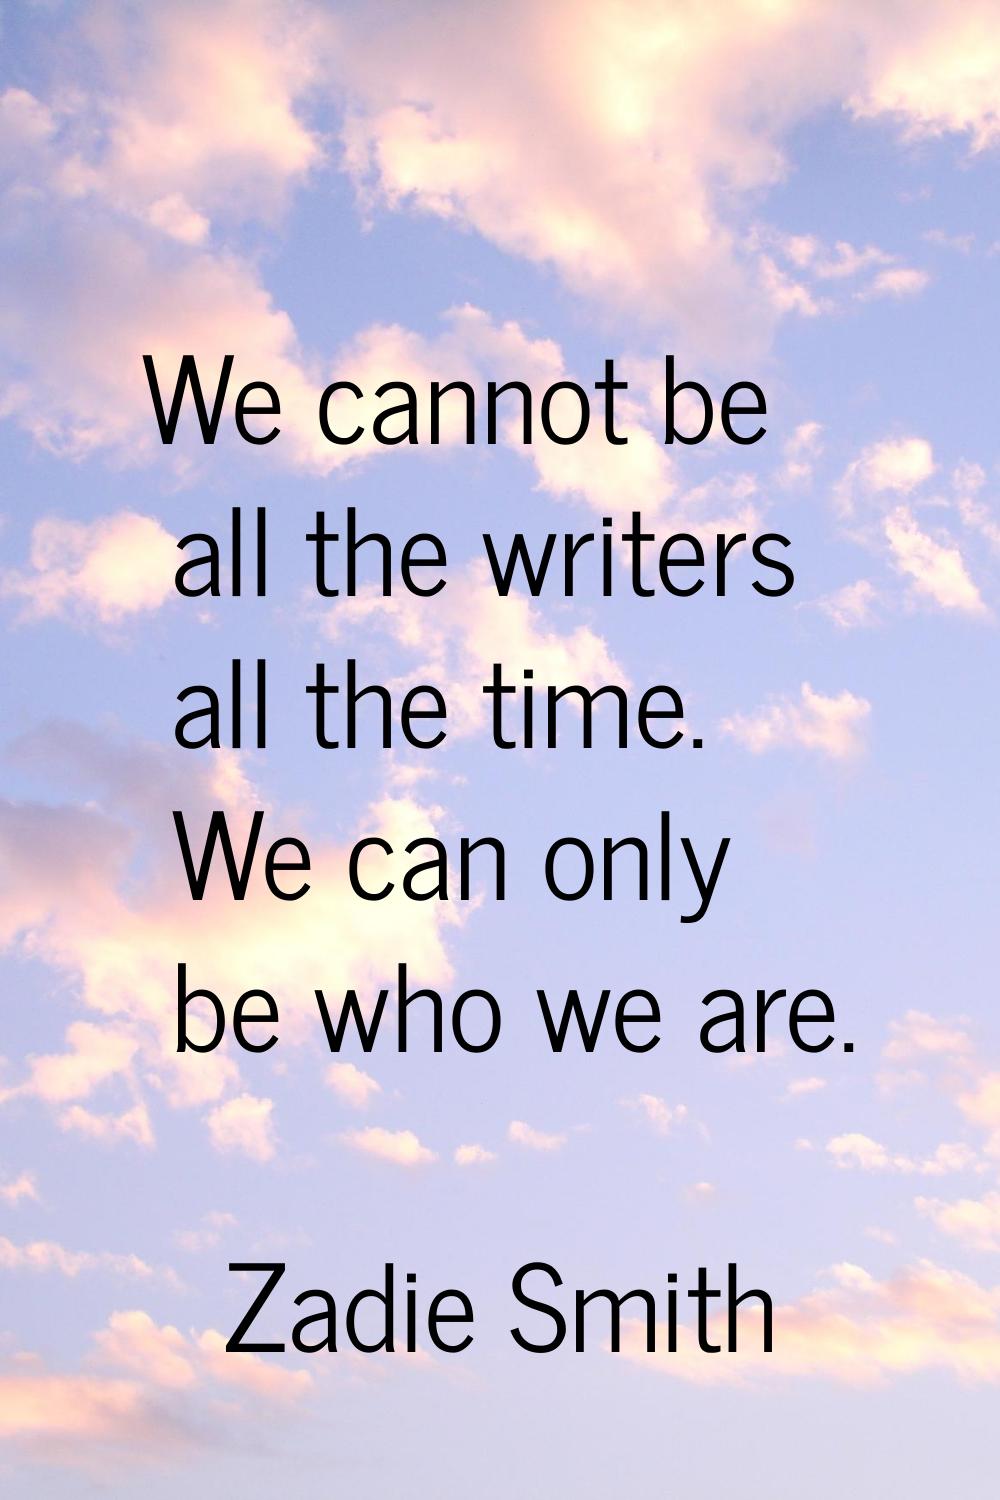 We cannot be all the writers all the time. We can only be who we are.